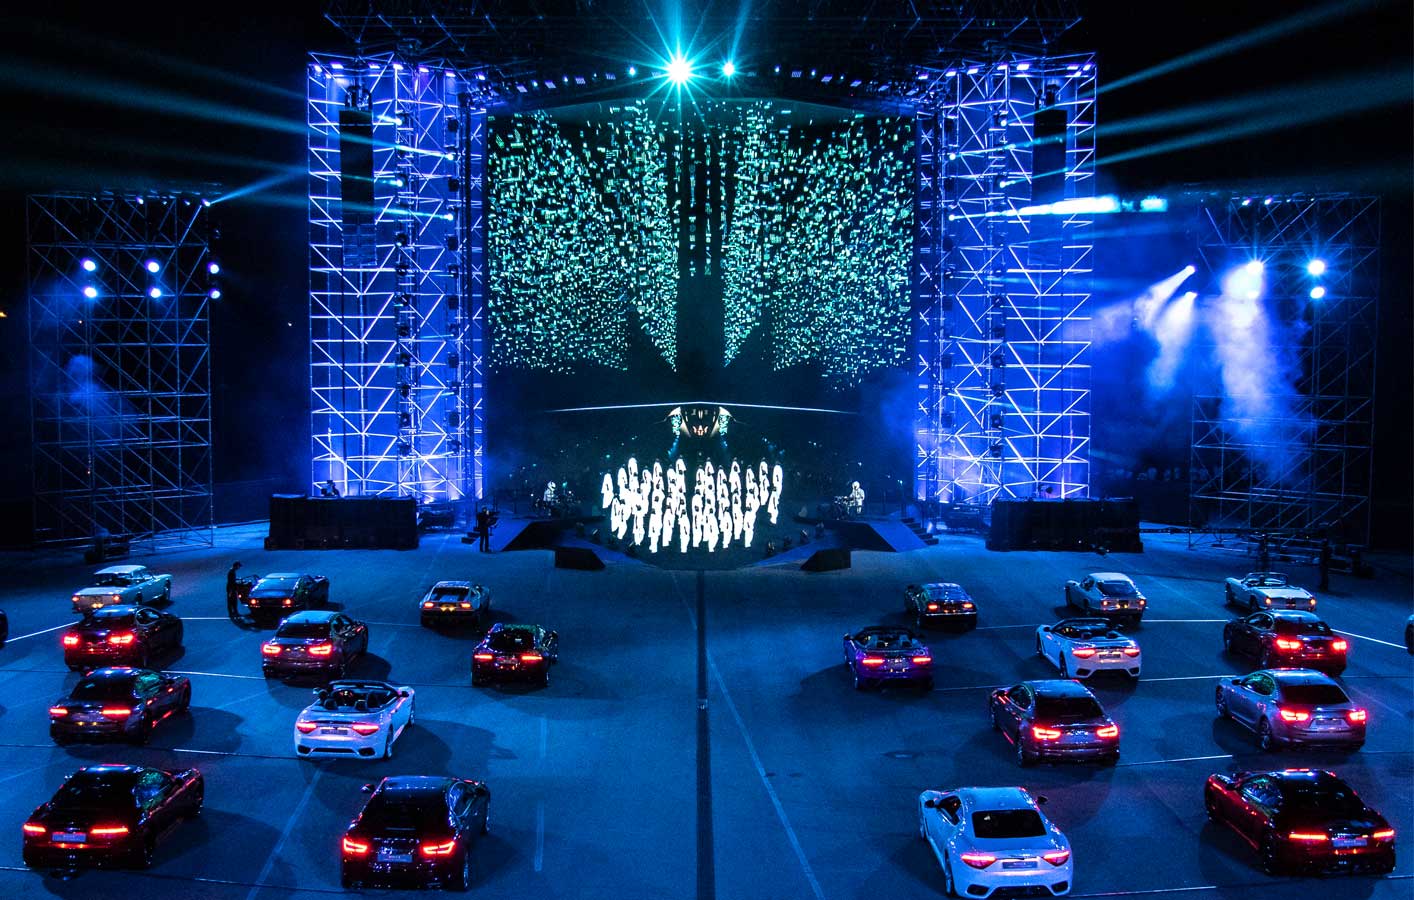 disguise adds new allure to the Maserati MC20 launch event narrative